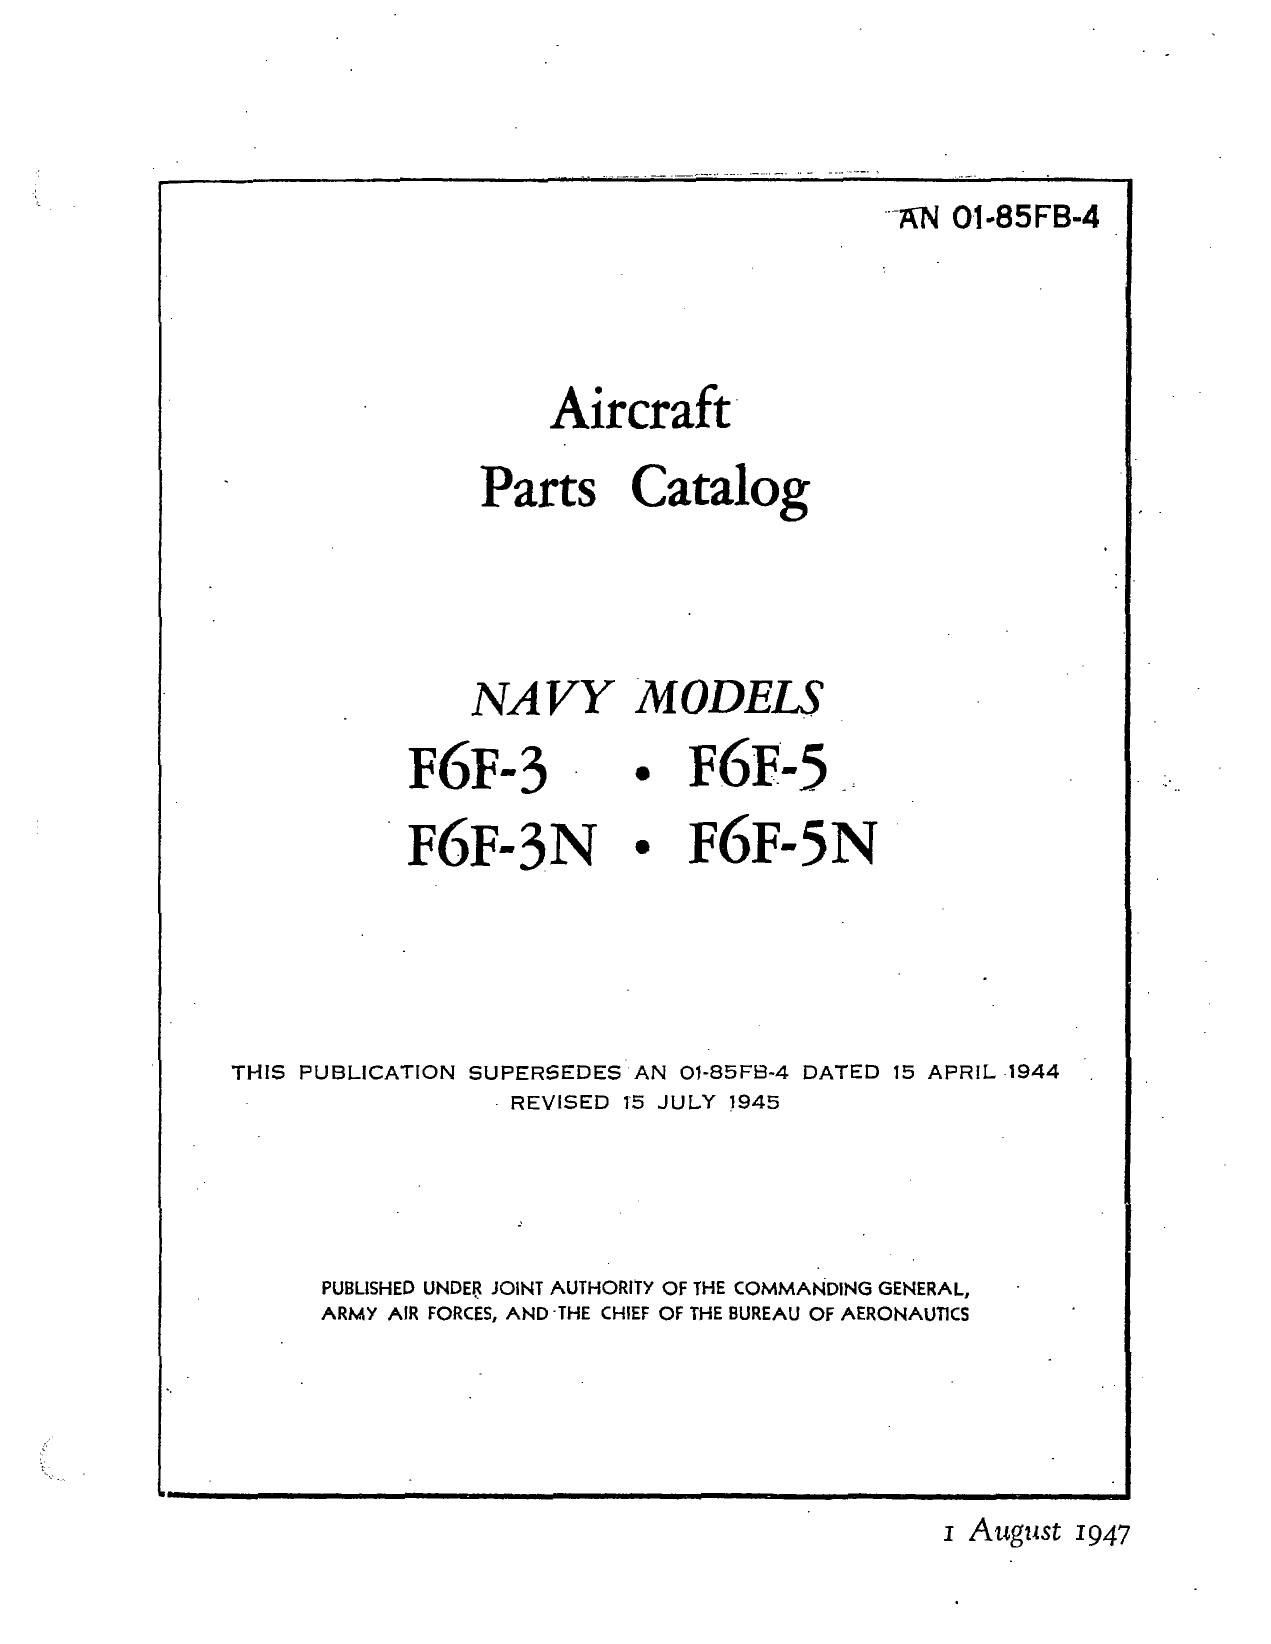 Sample page 1 from AirCorps Library document: Parts Catalog - F6F-3, F6F-5